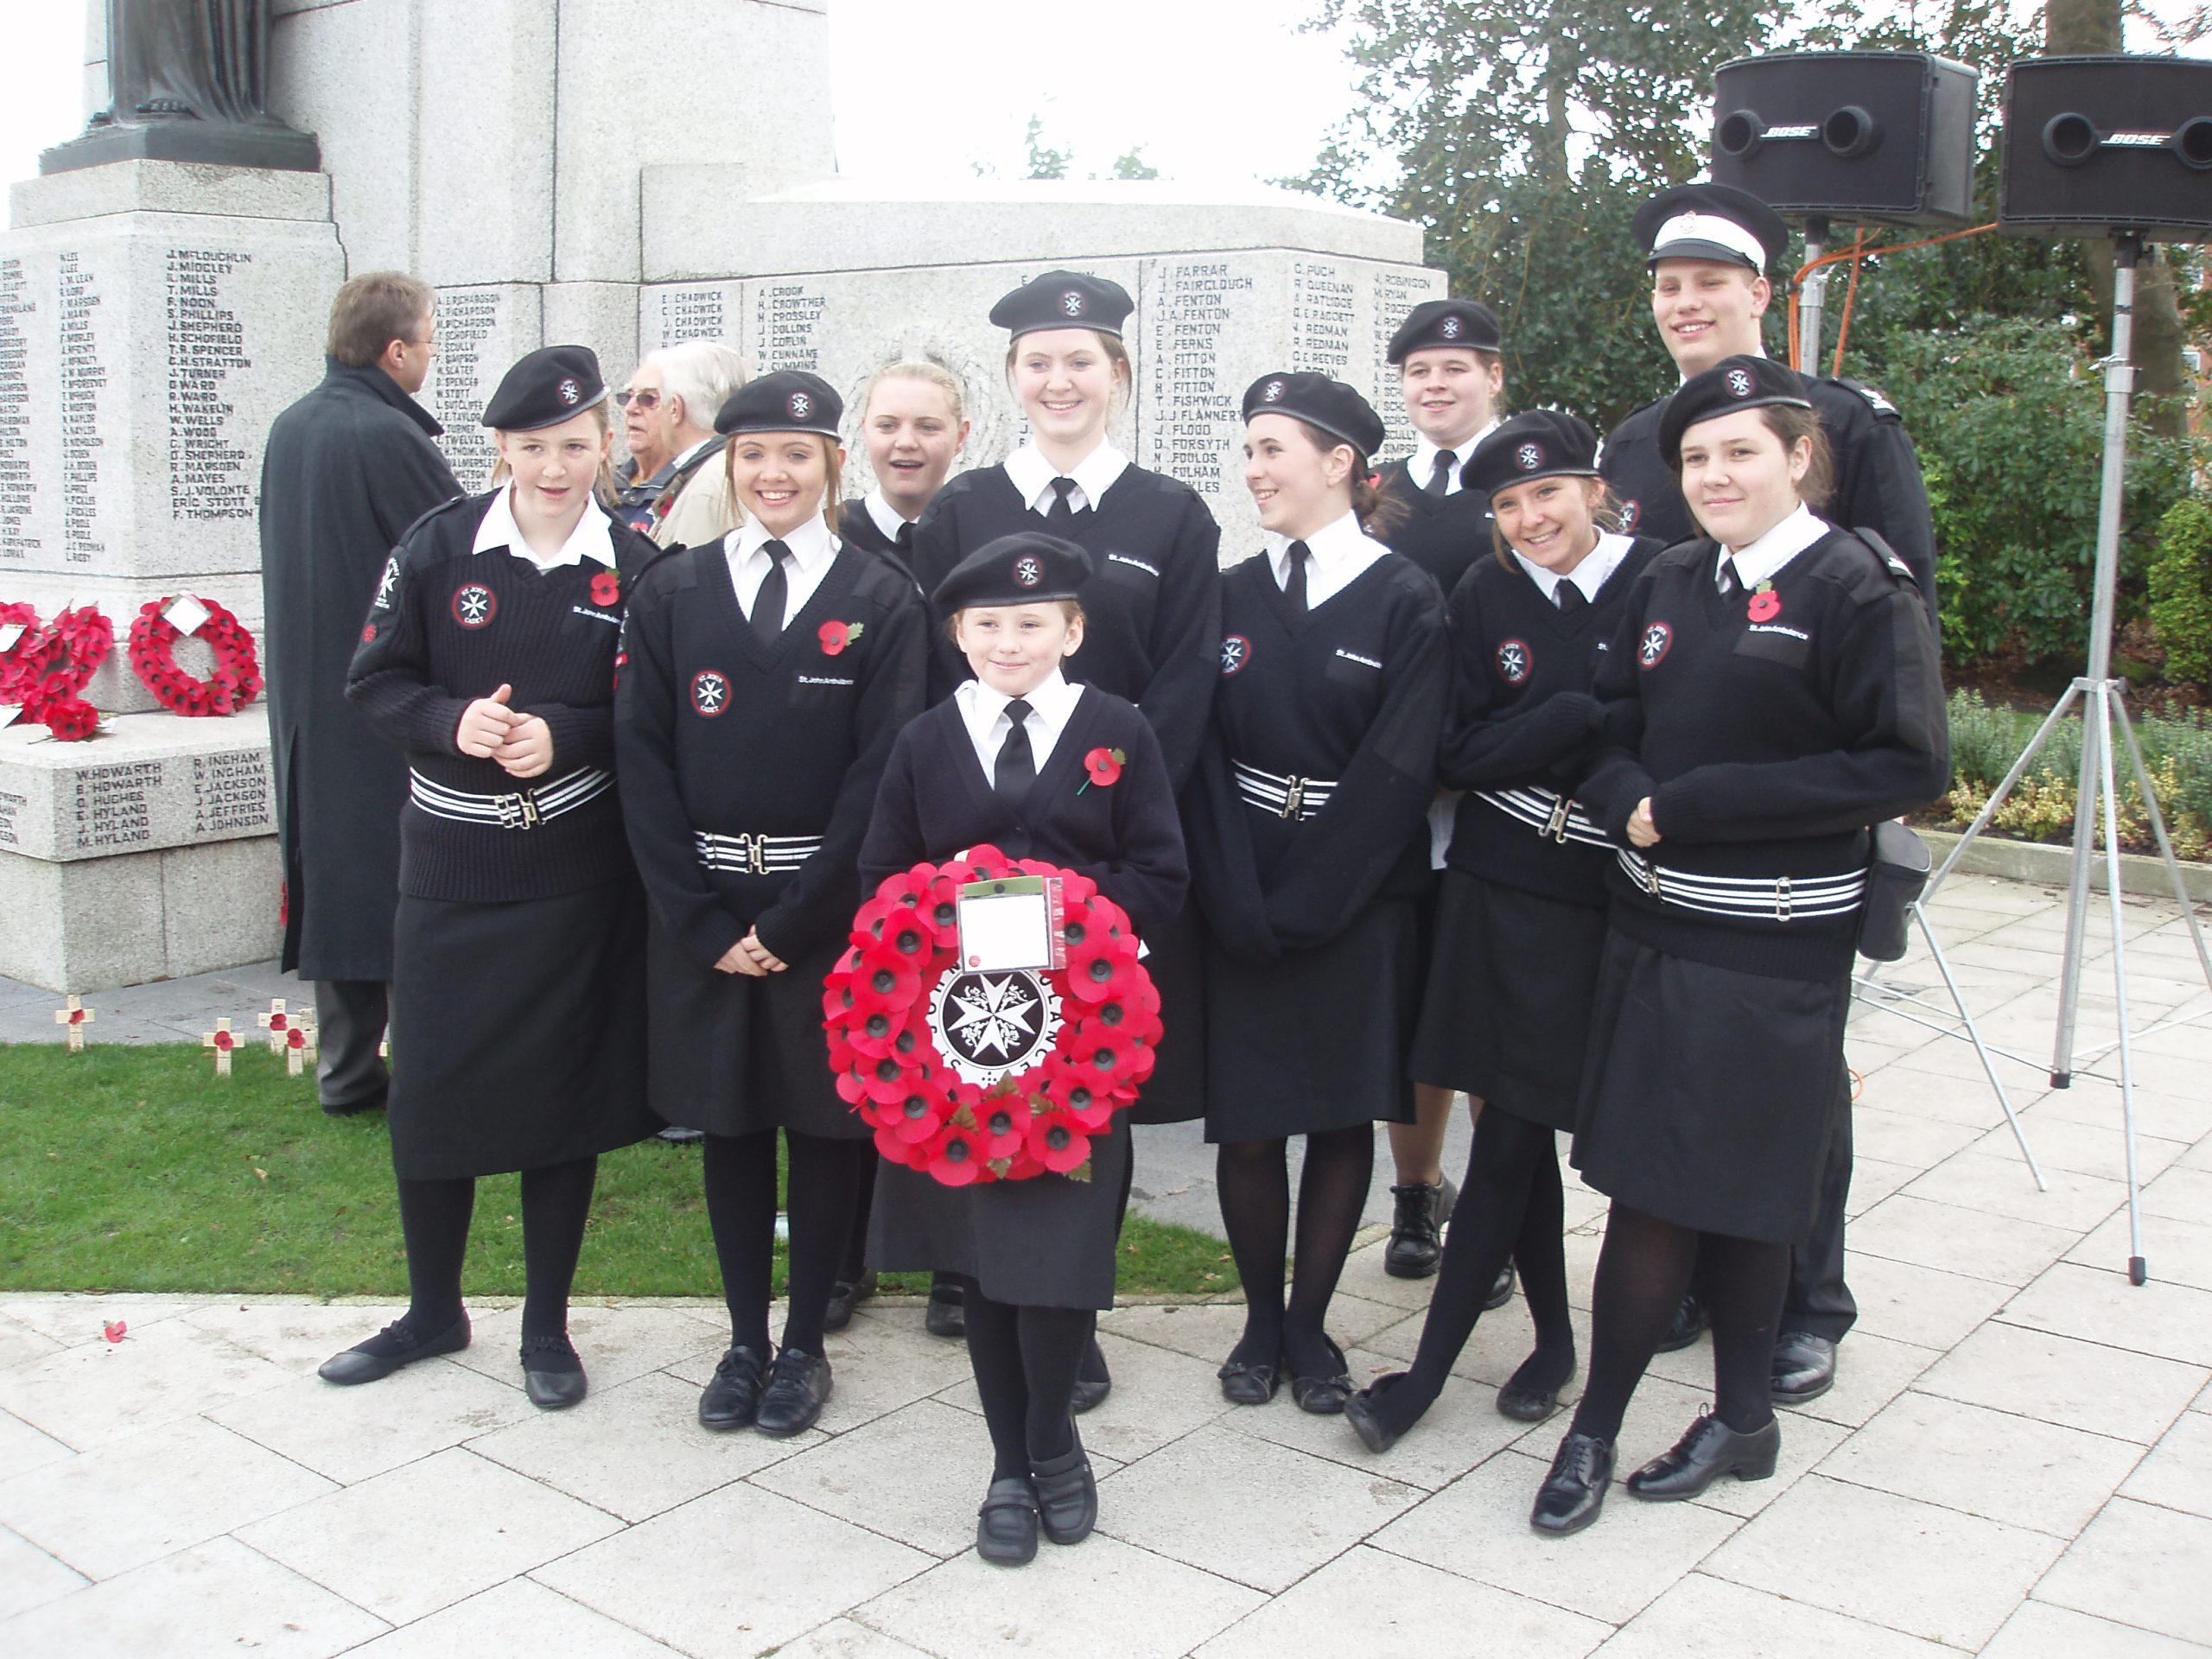 Colour photograph of 8 Cadets in black and white St John uniform posing for a photograph on Remembrance Sunday, Chloe Hobson holds a wreath of poppies in the front row.